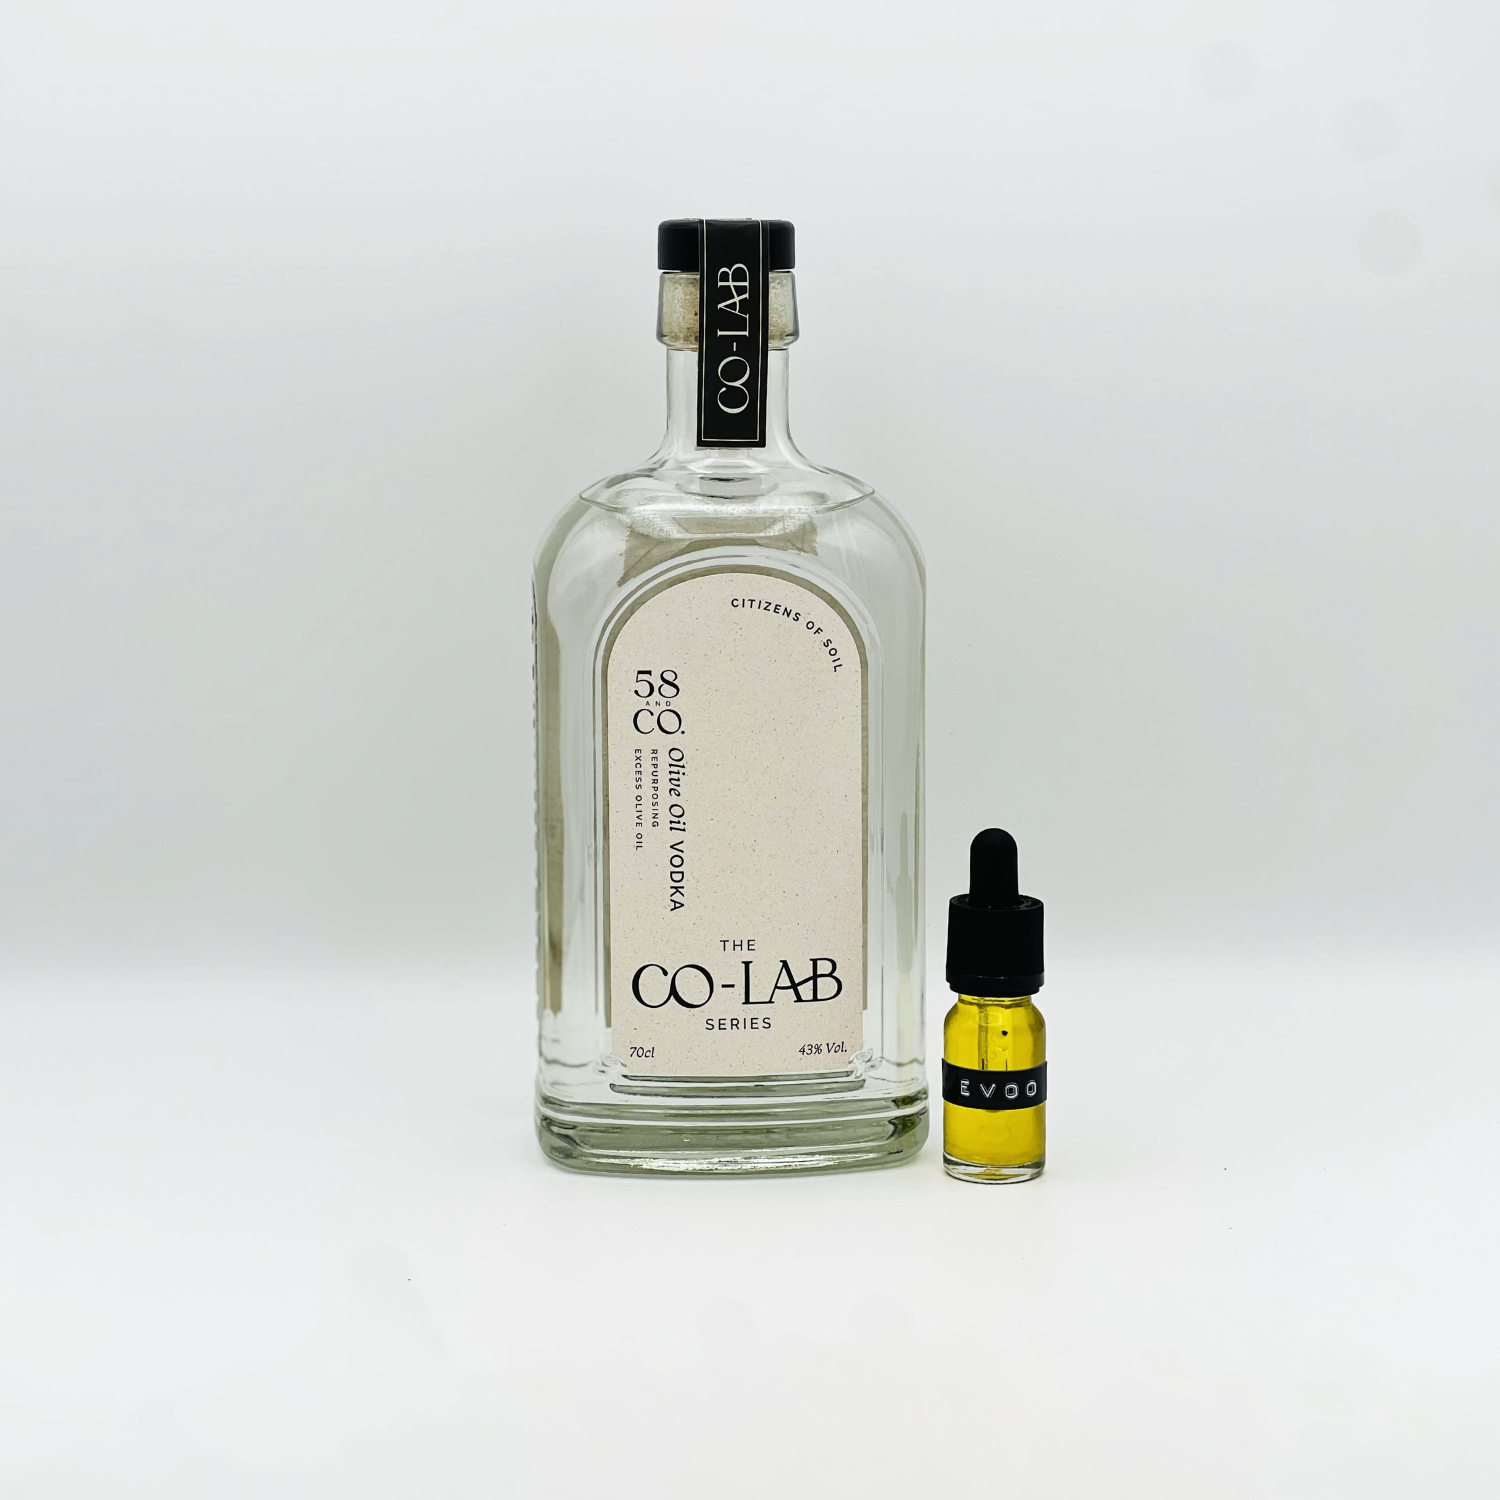 58 and CO CO-LAB Olive Oil Vodka Bottle with small bottle of extra virgin olive oil